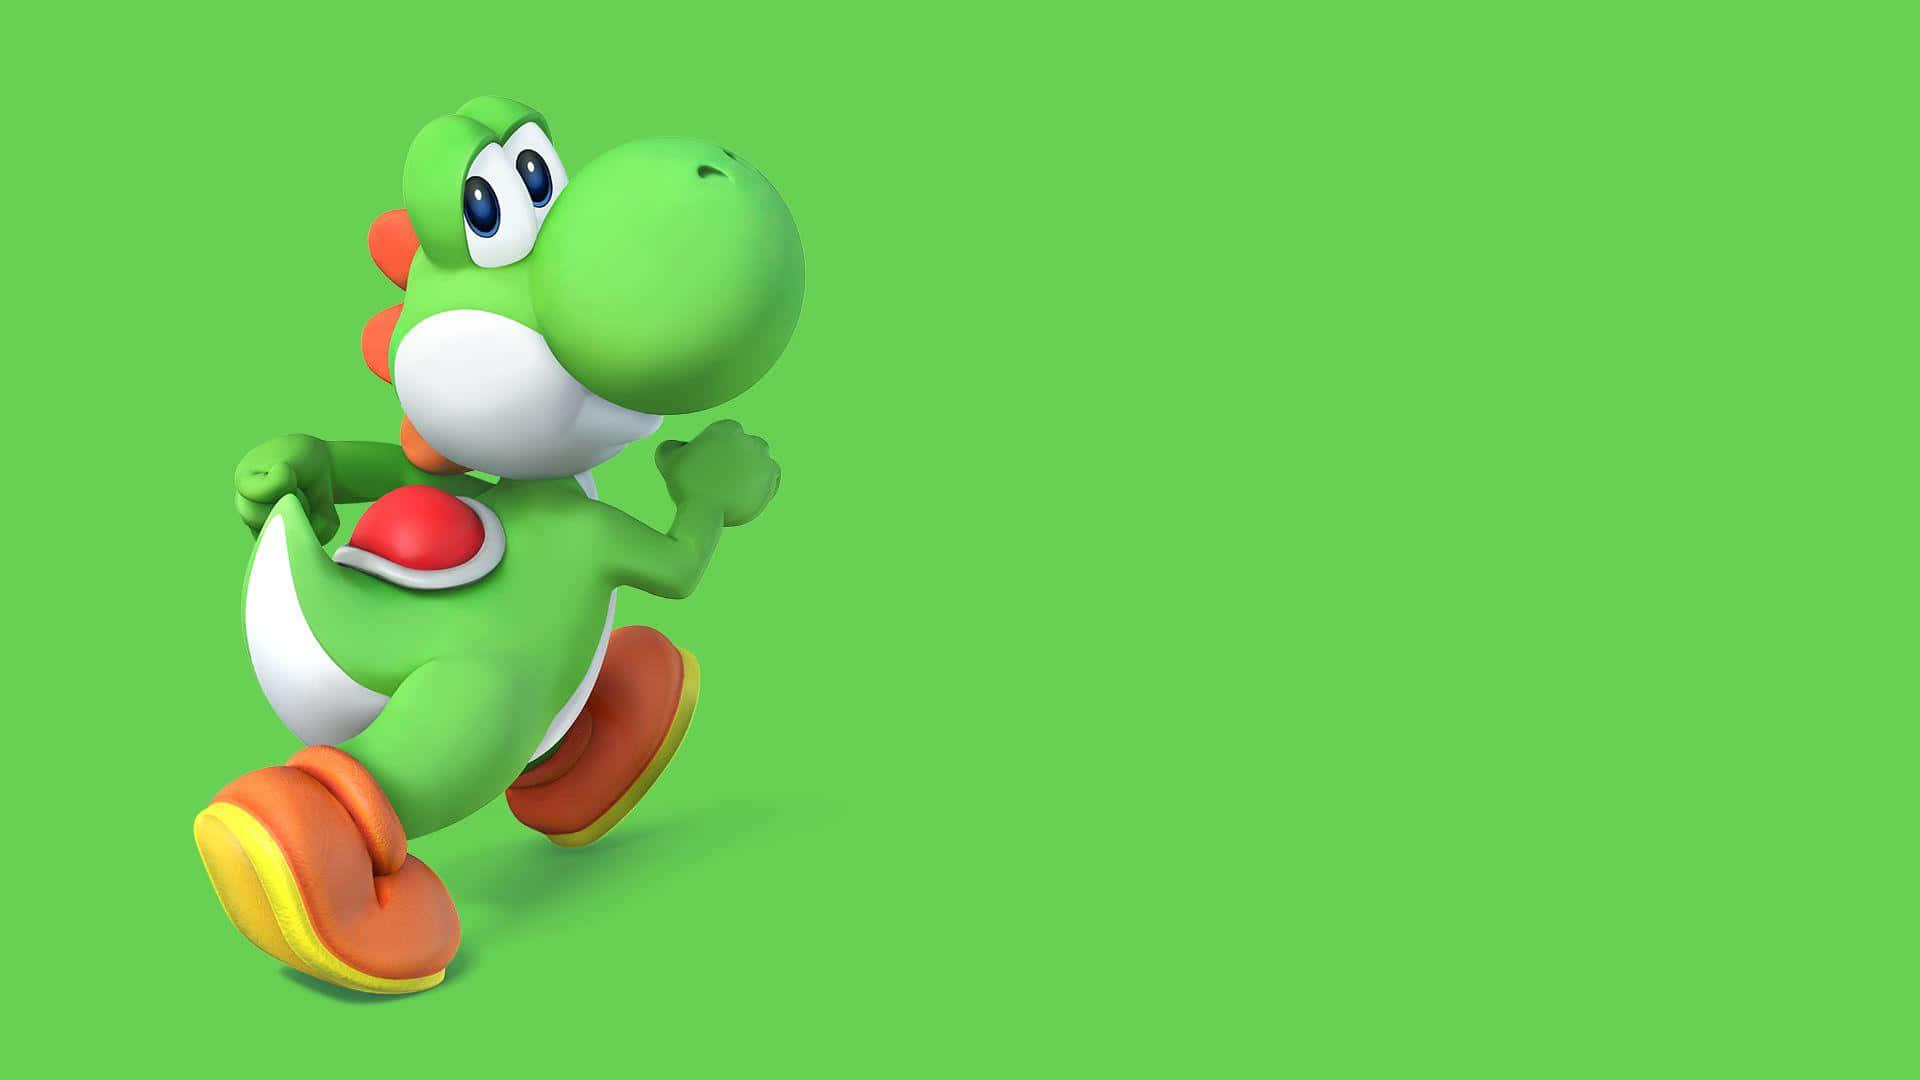 Explore Fantastic Lands With The All-Powerful Yoshi Wallpaper